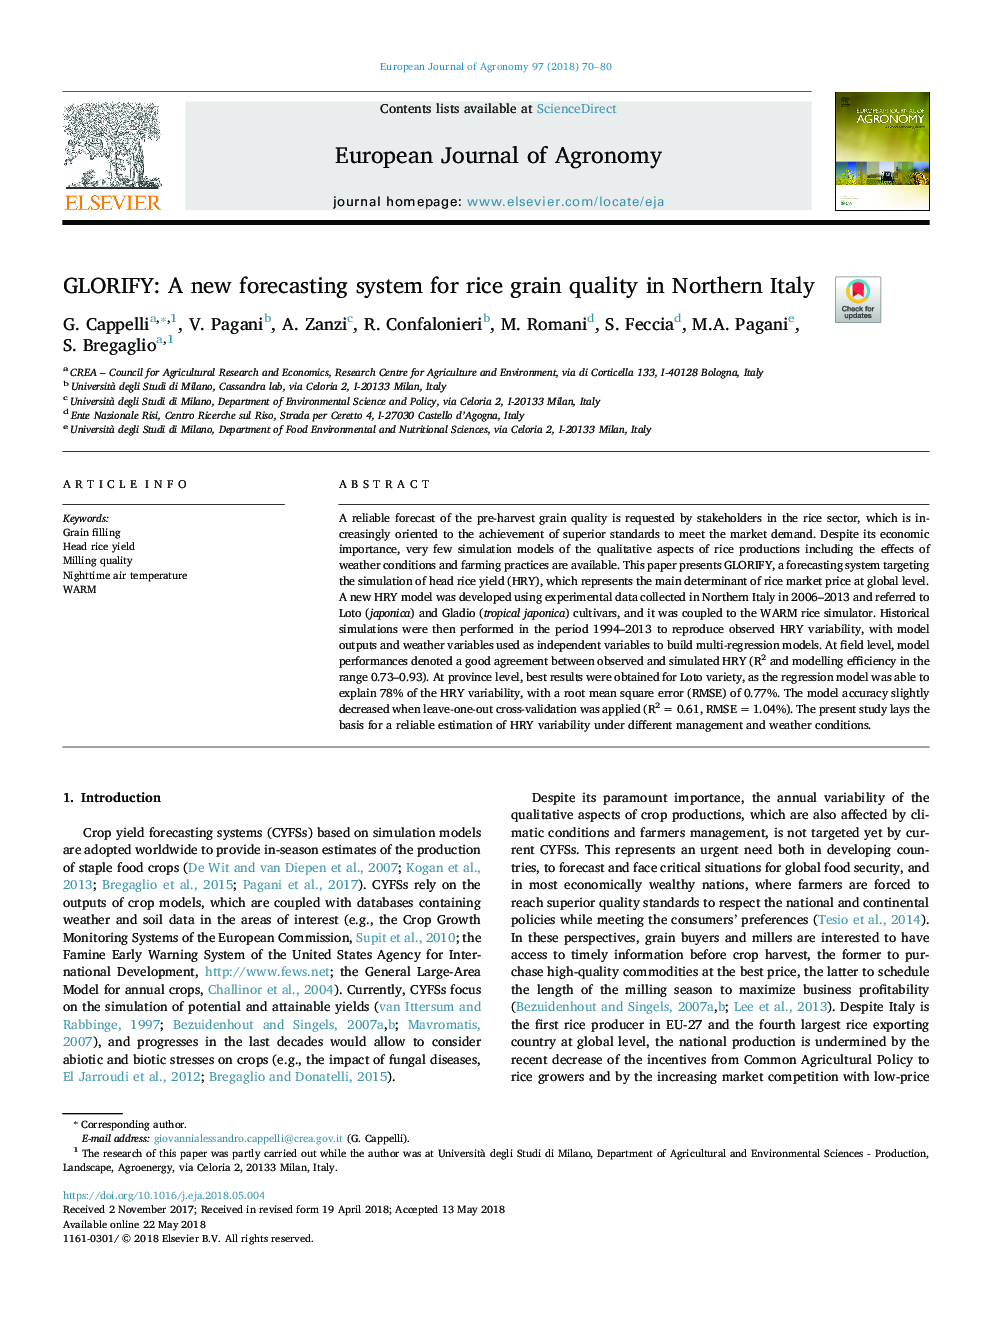 GLORIFY: A new forecasting system for rice grain quality in Northern Italy